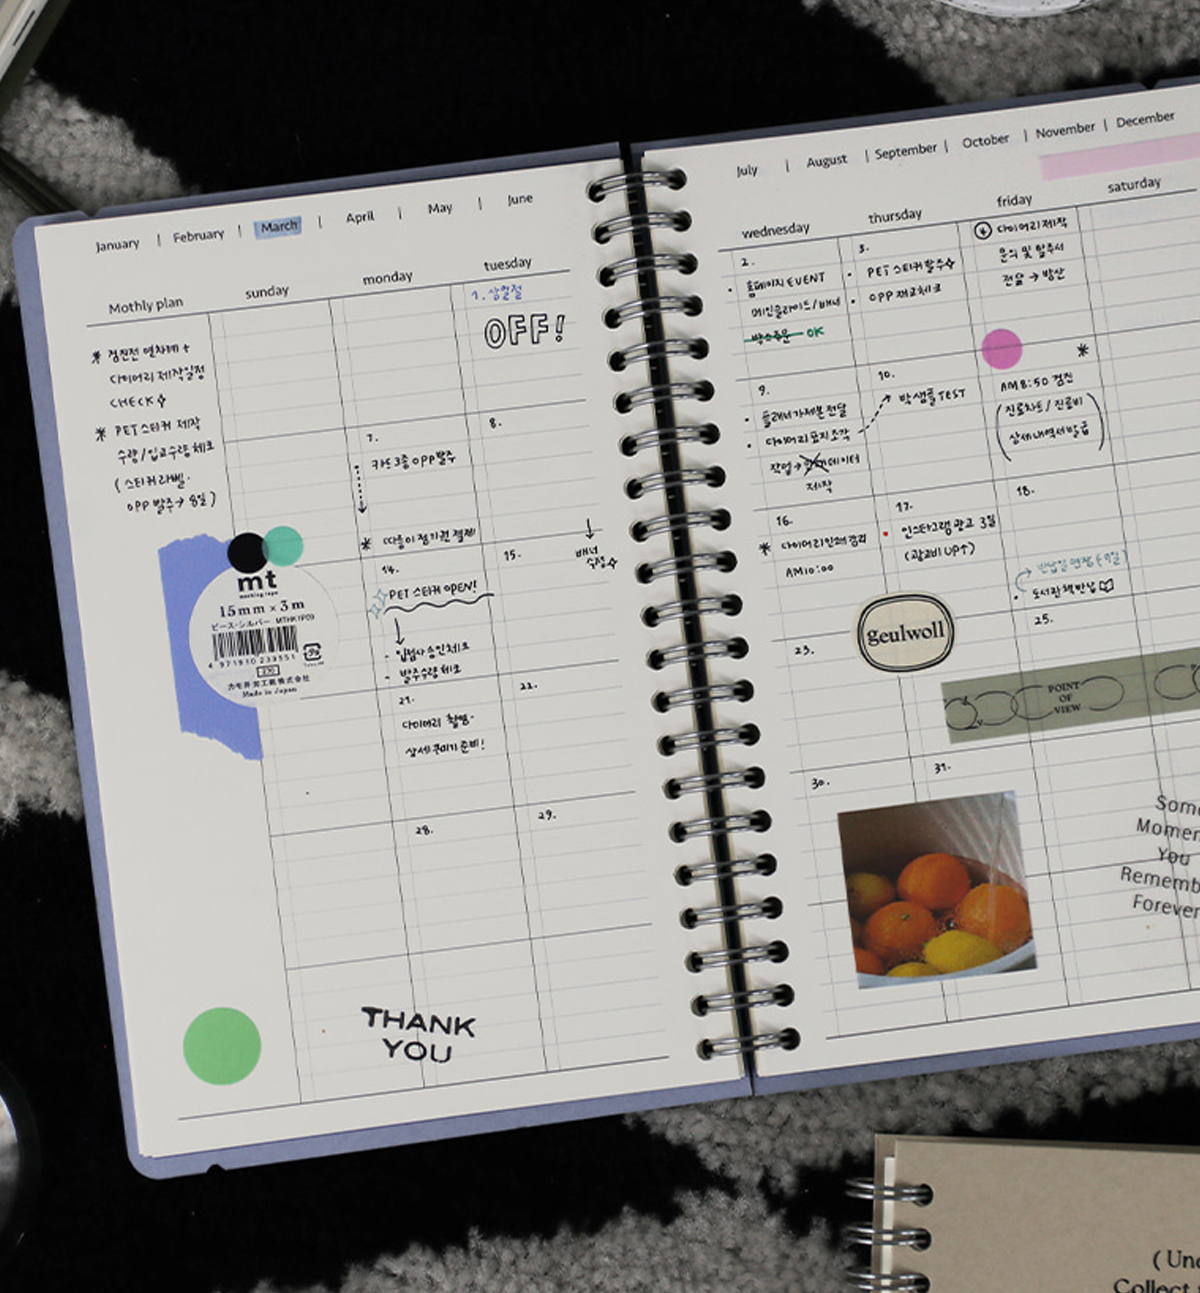 Archive Weekly Planner